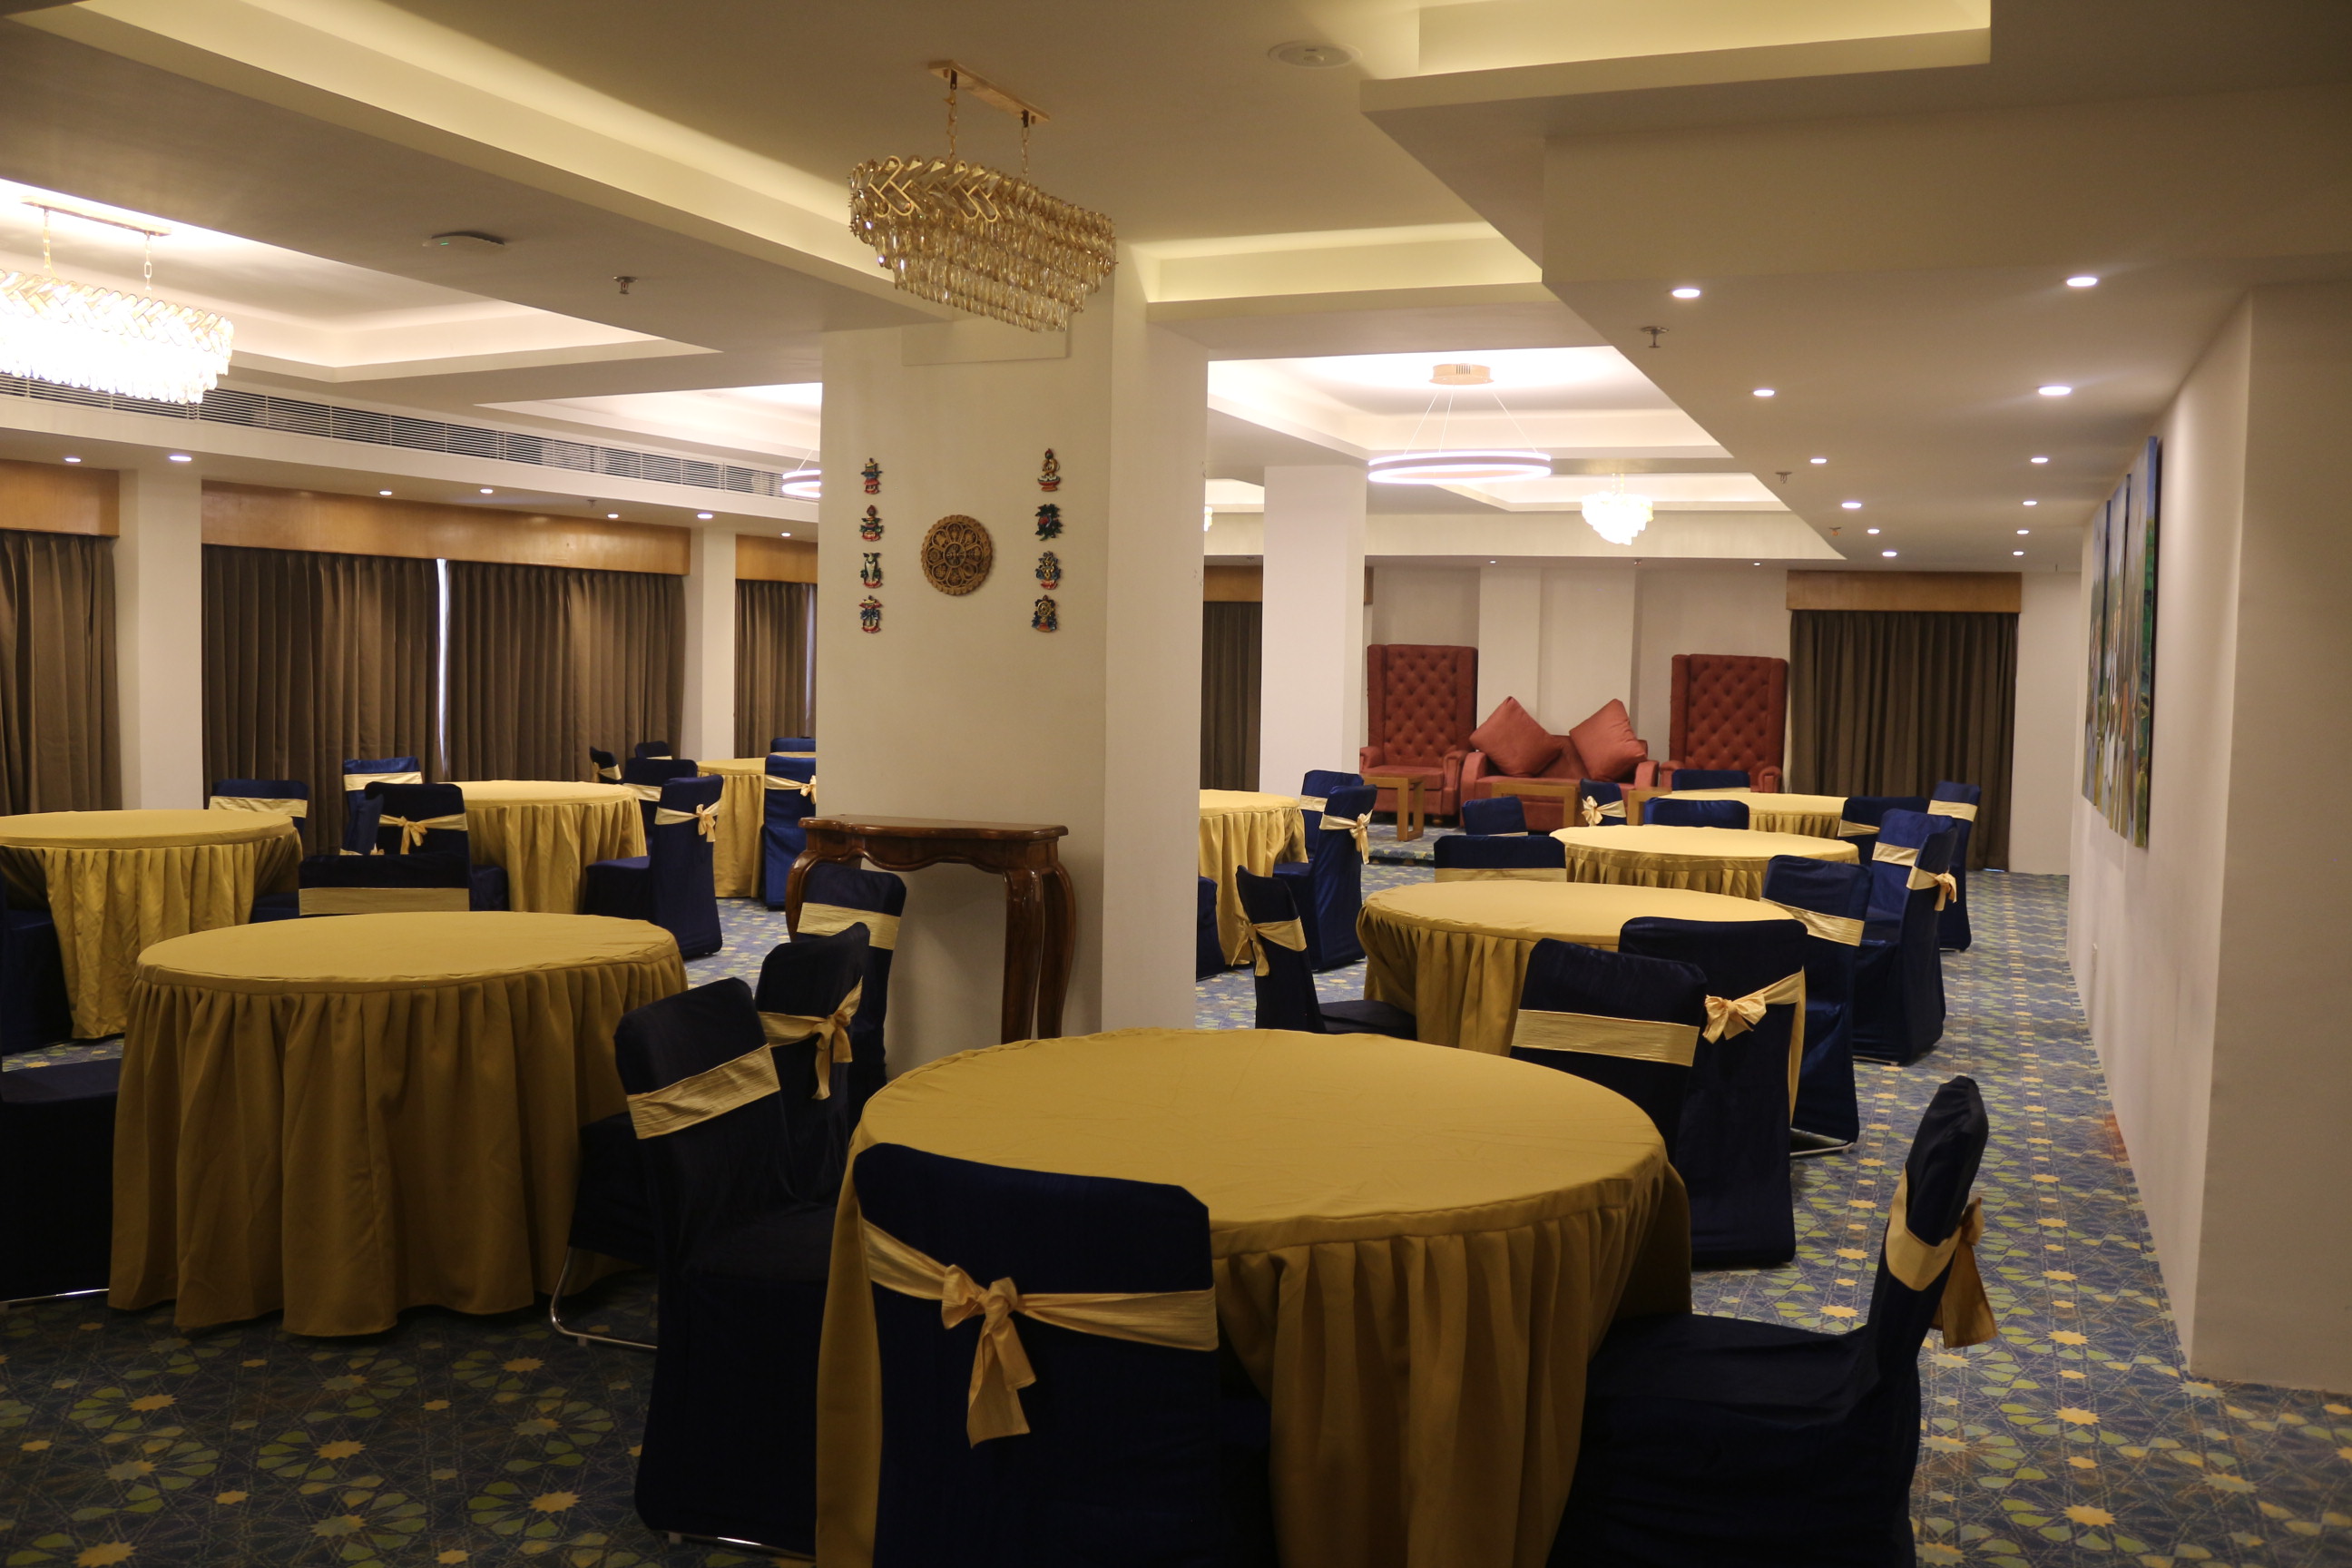 Social gathering in mind? Book our Banquet Hall